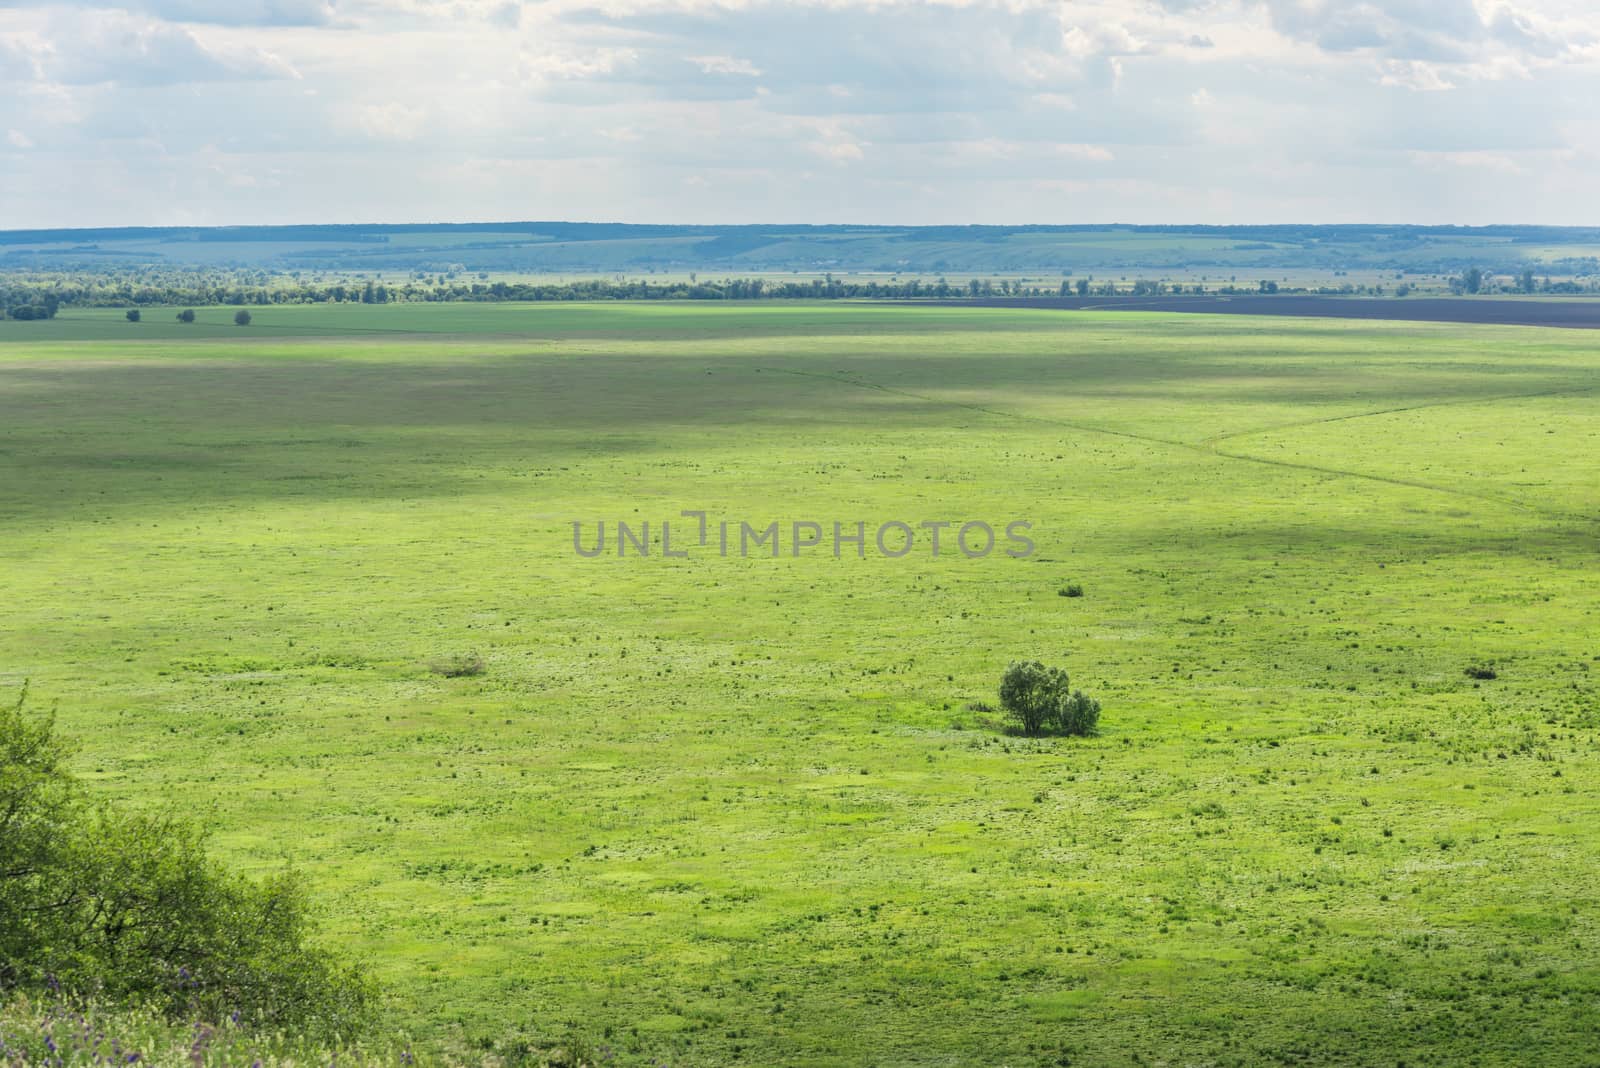 Beautiful background of a lonely Bush or tree on a green meadow, horizon line and sky with clouds by claire_lucia